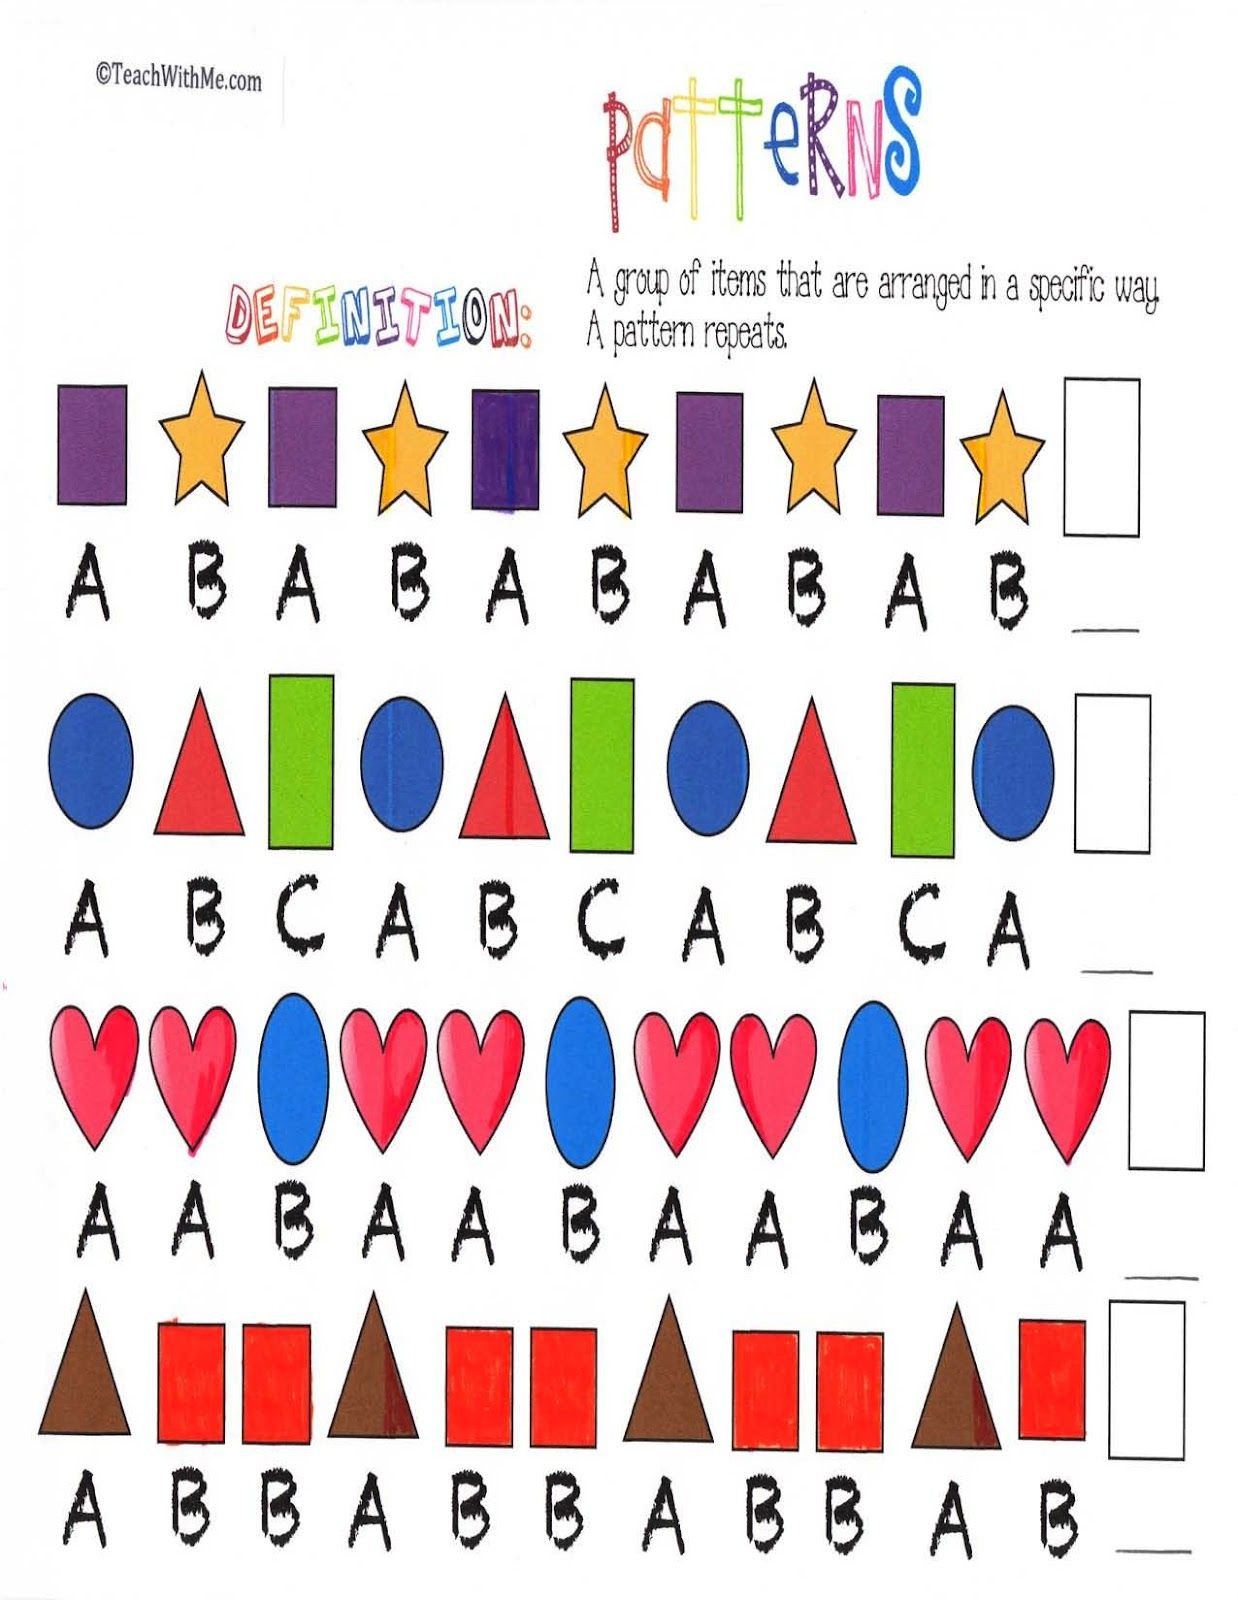 Free Math Worksheets Second Grade 2 Counting Money Canadian Money Words to Number